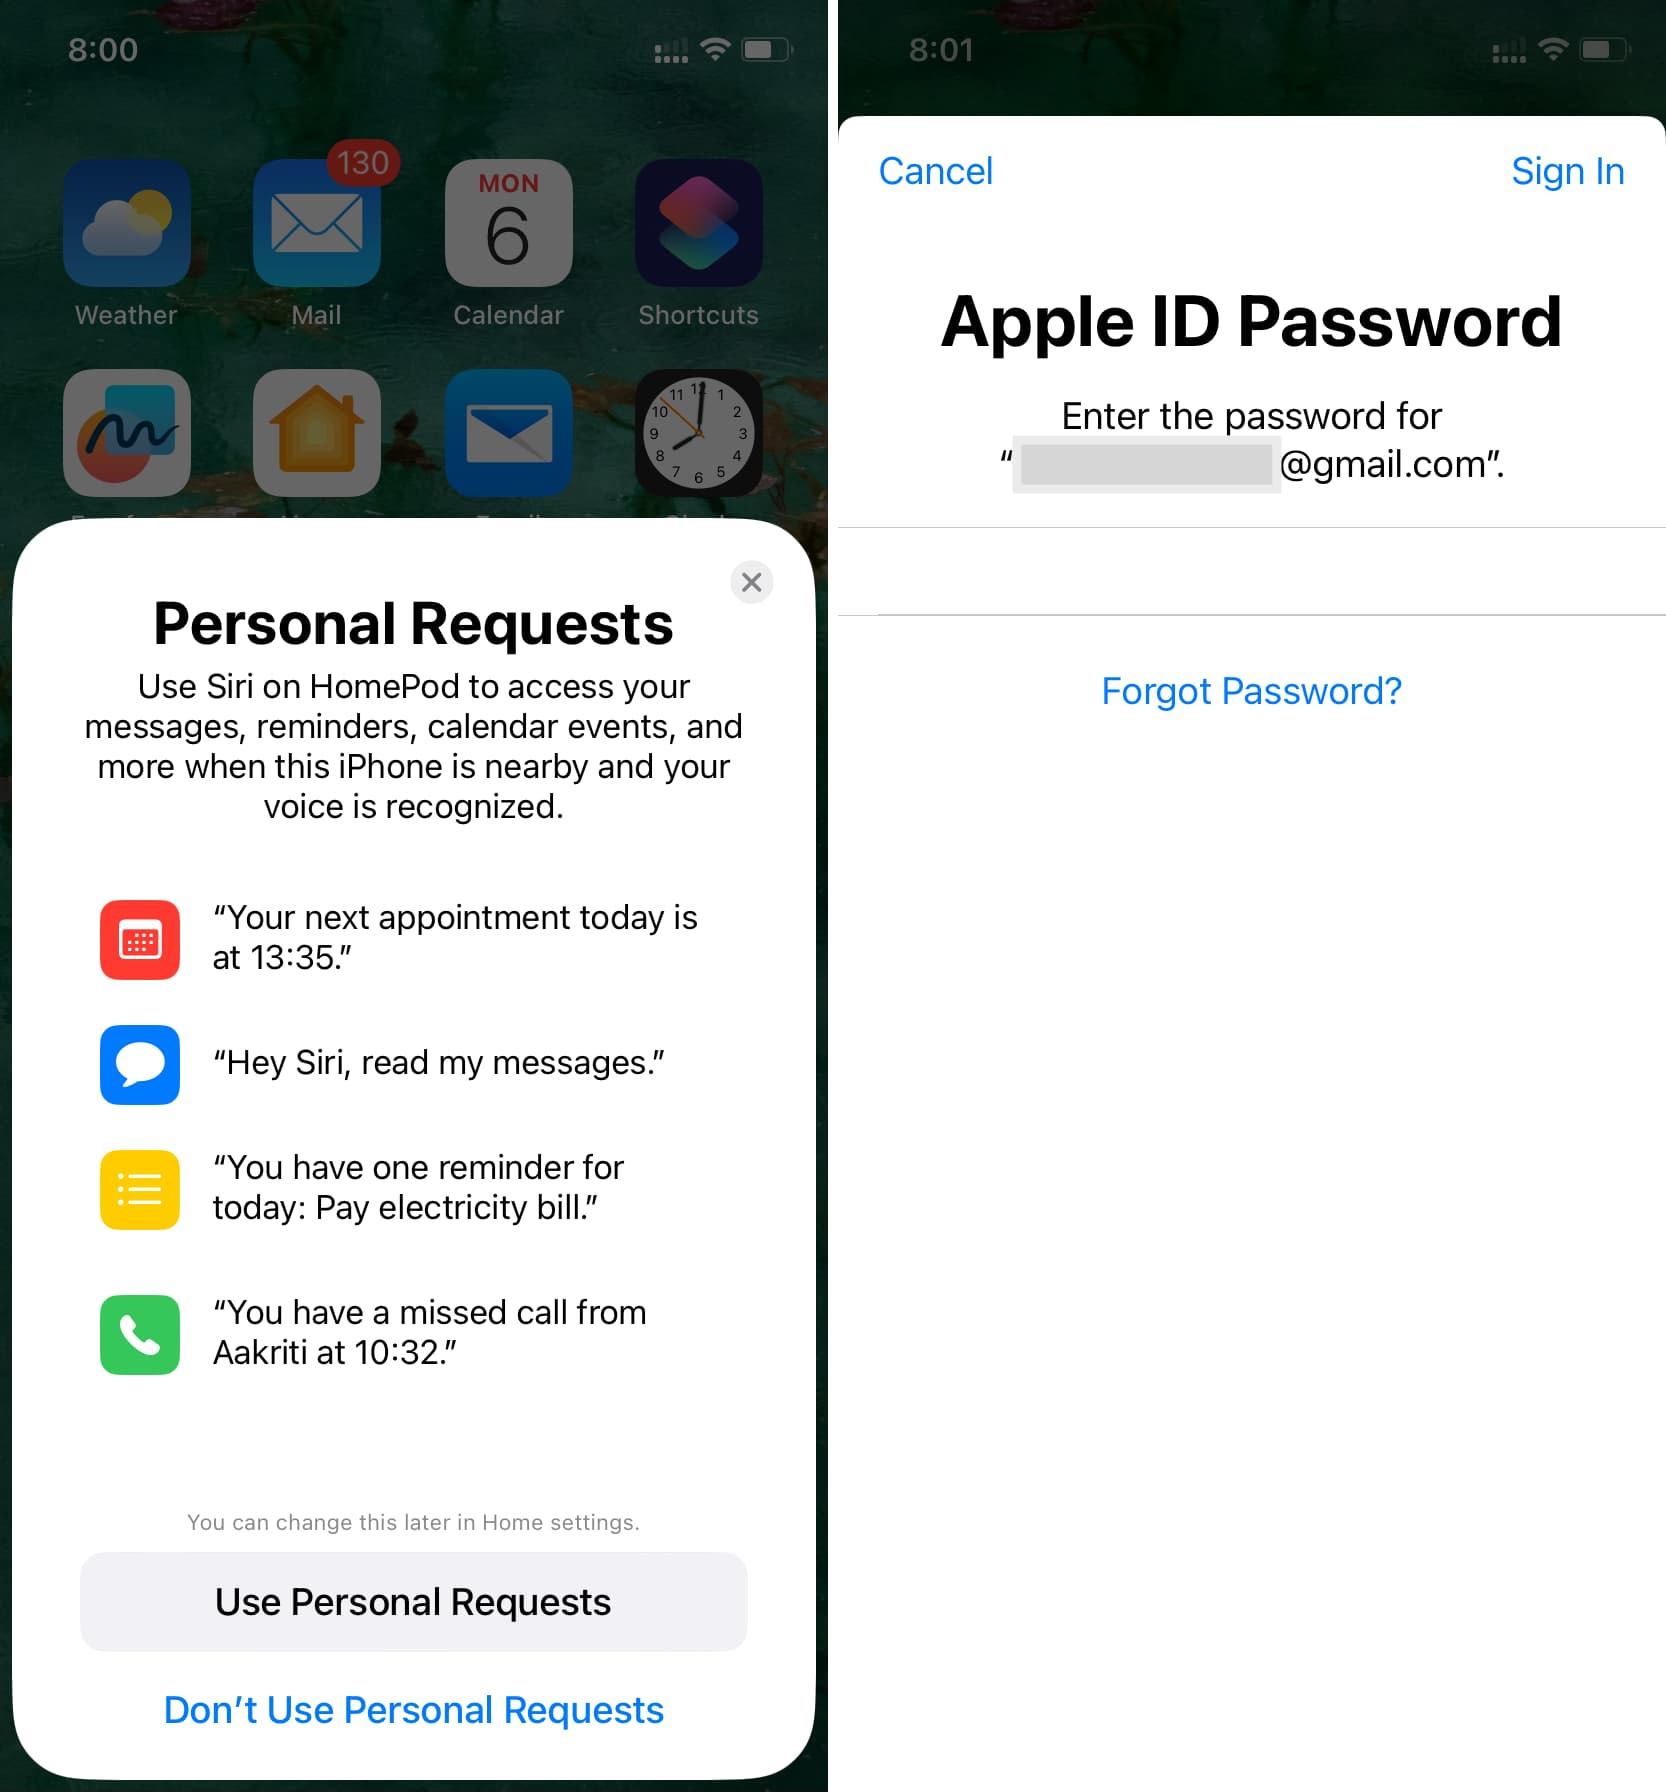 Personal Requests and Apple ID password on HomePod